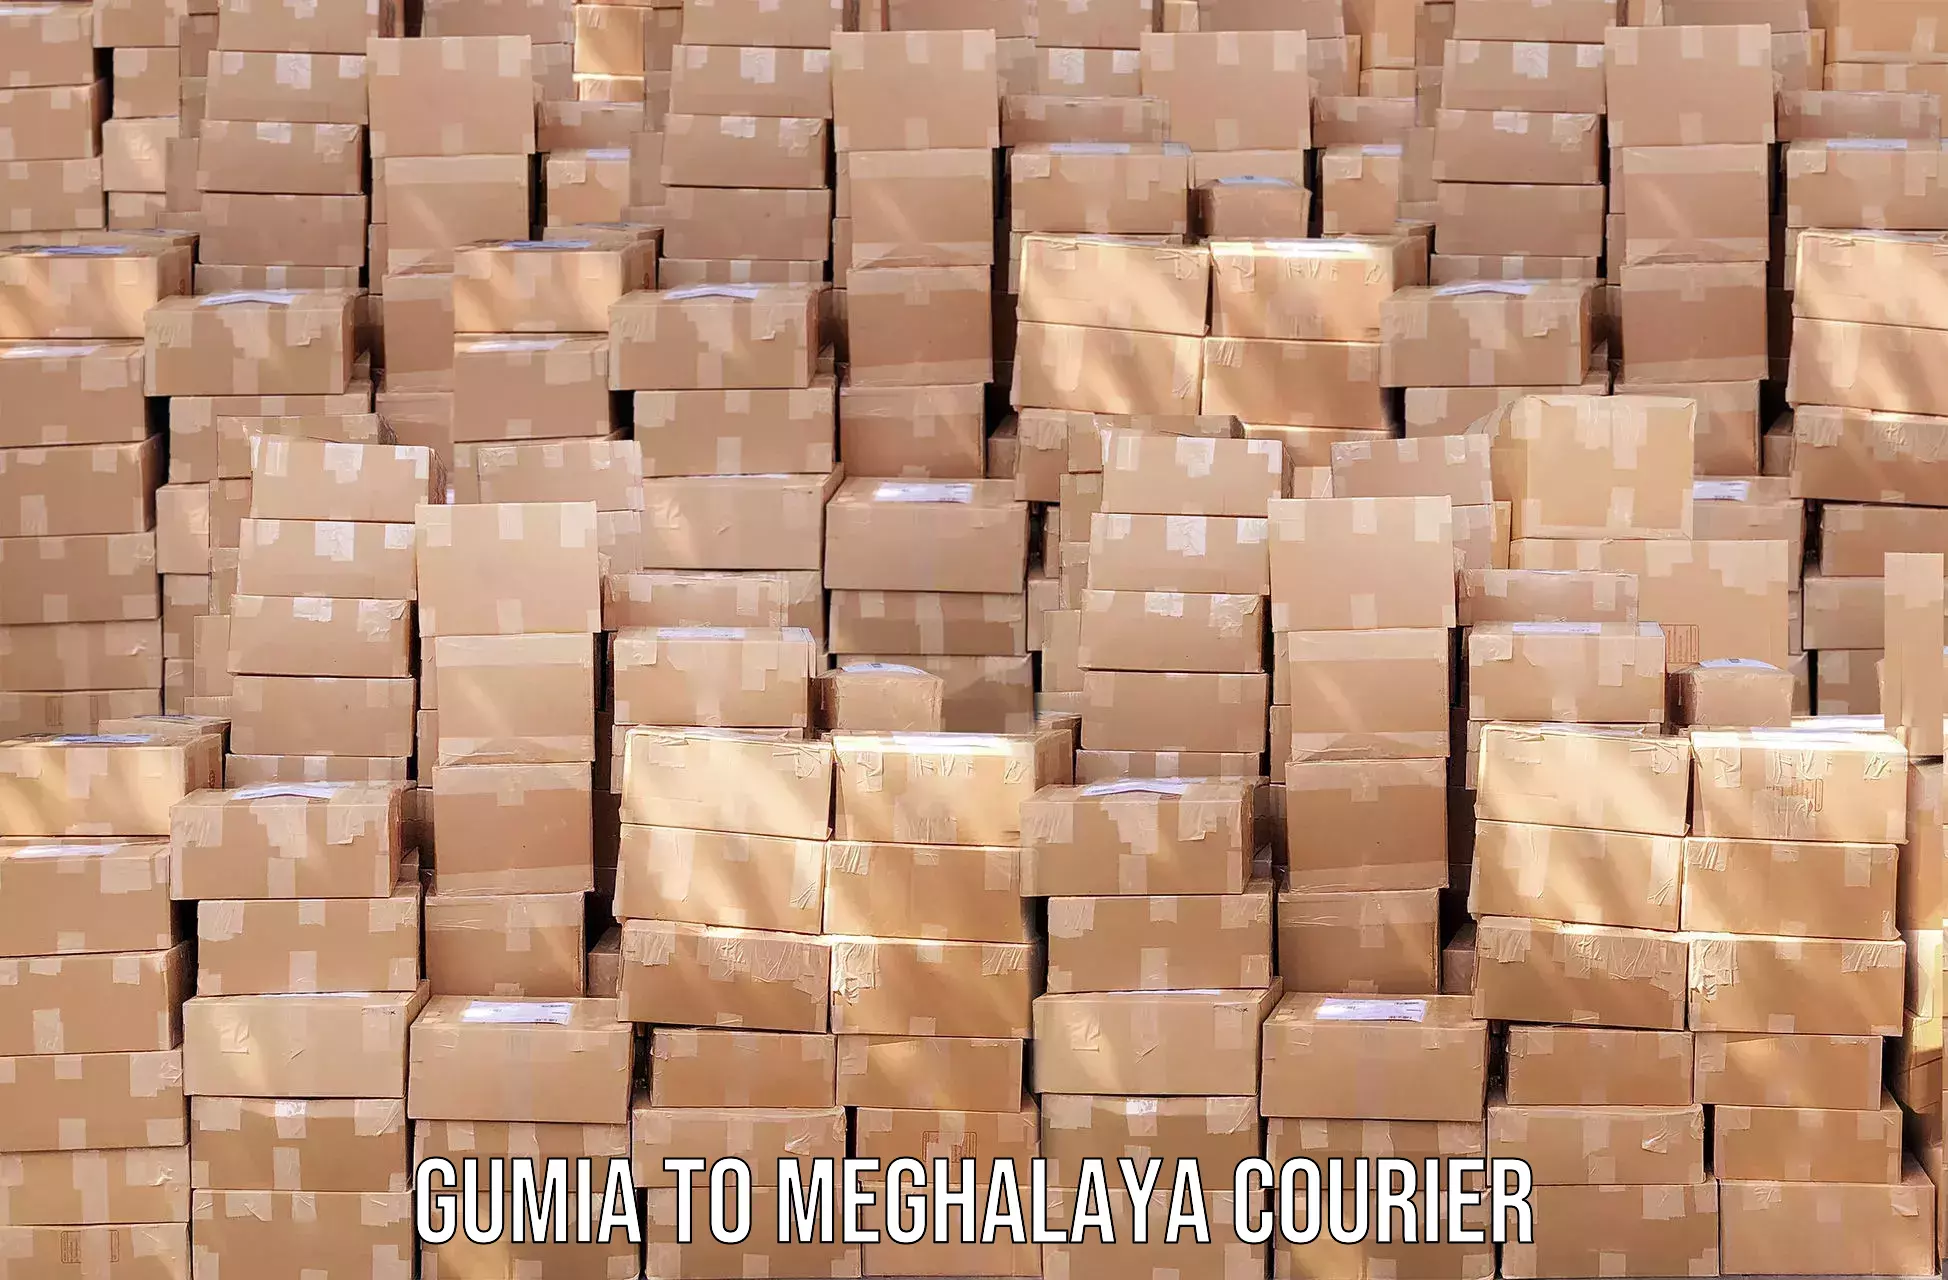 Heavy parcel delivery in Gumia to Tura